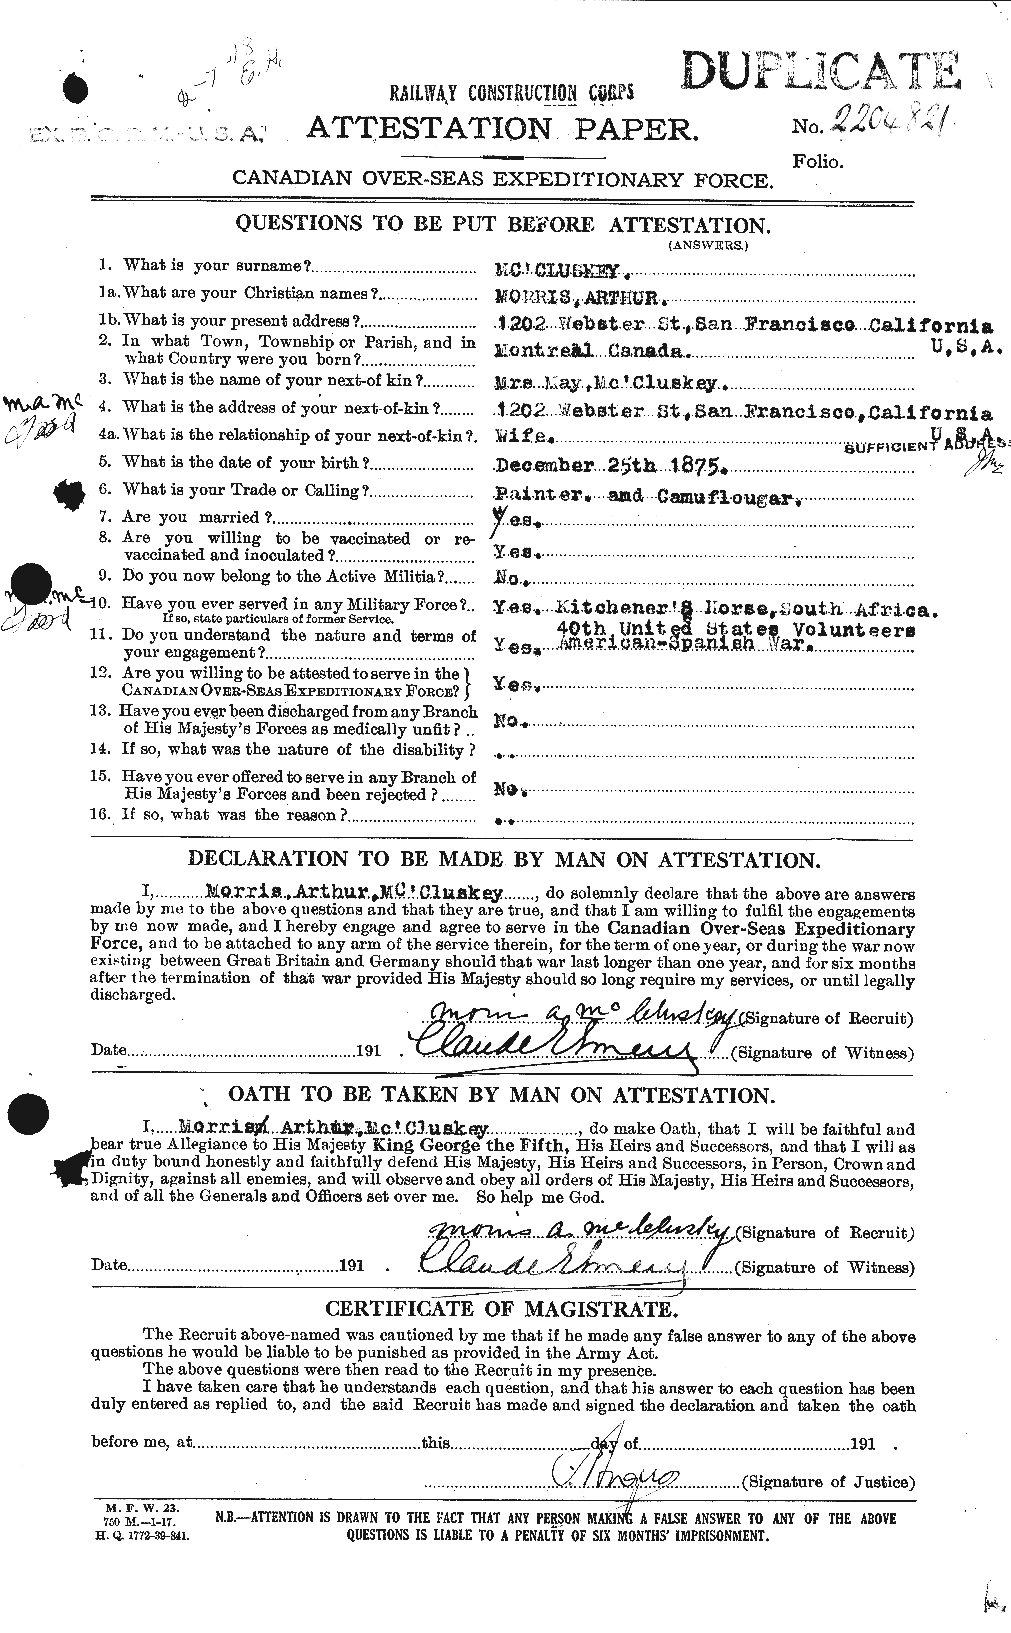 Personnel Records of the First World War - CEF 133476a